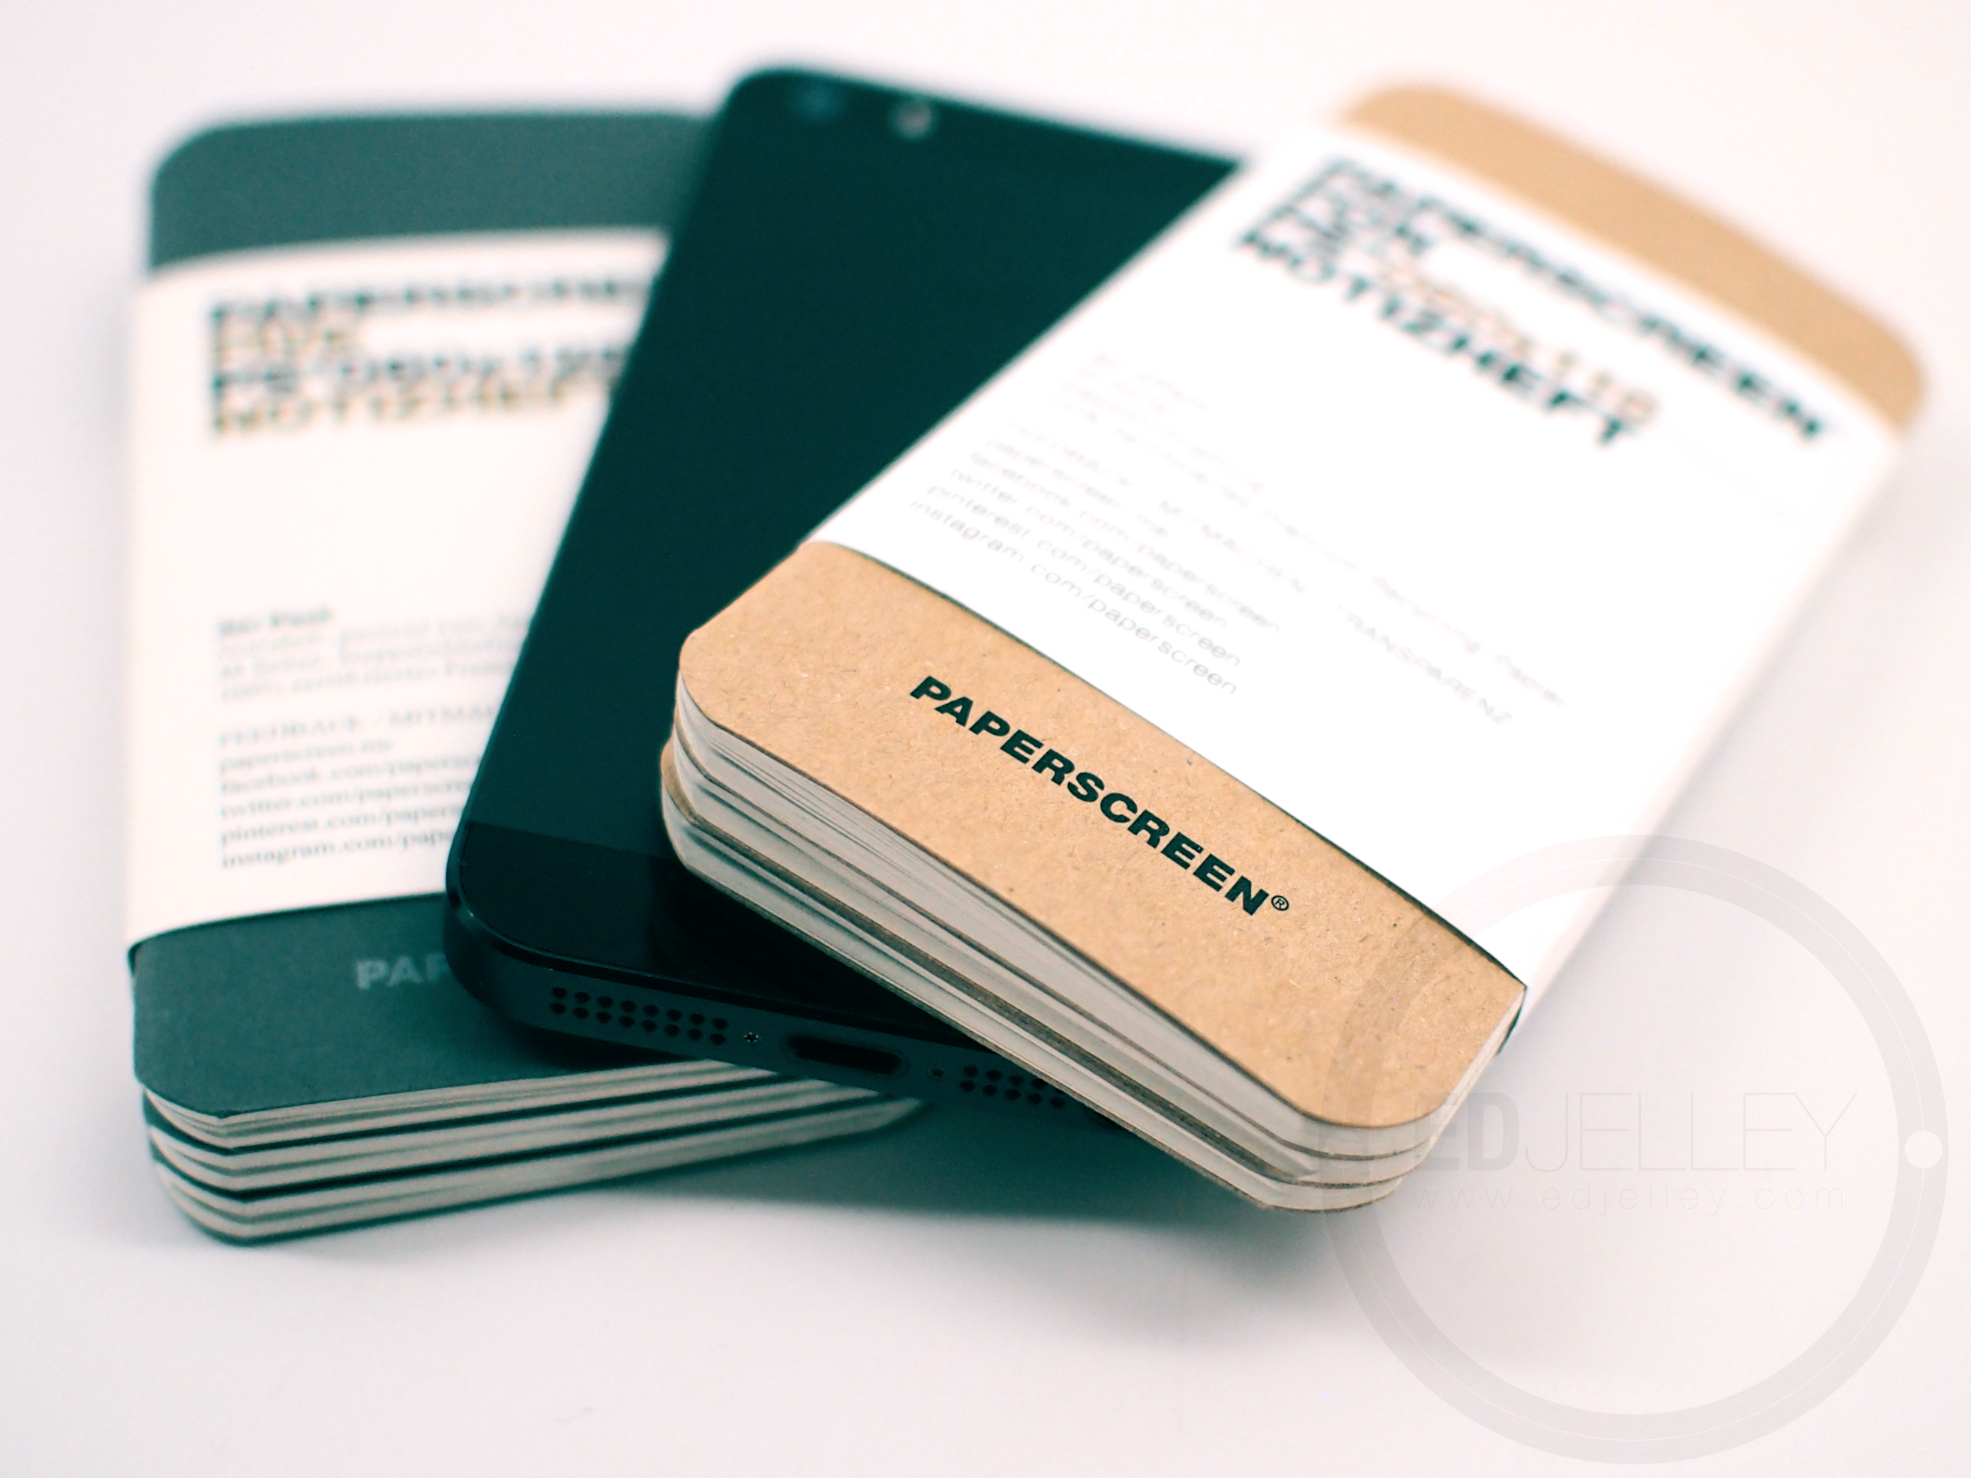 Paperscreen Four/Five Pocket Notebook – Review